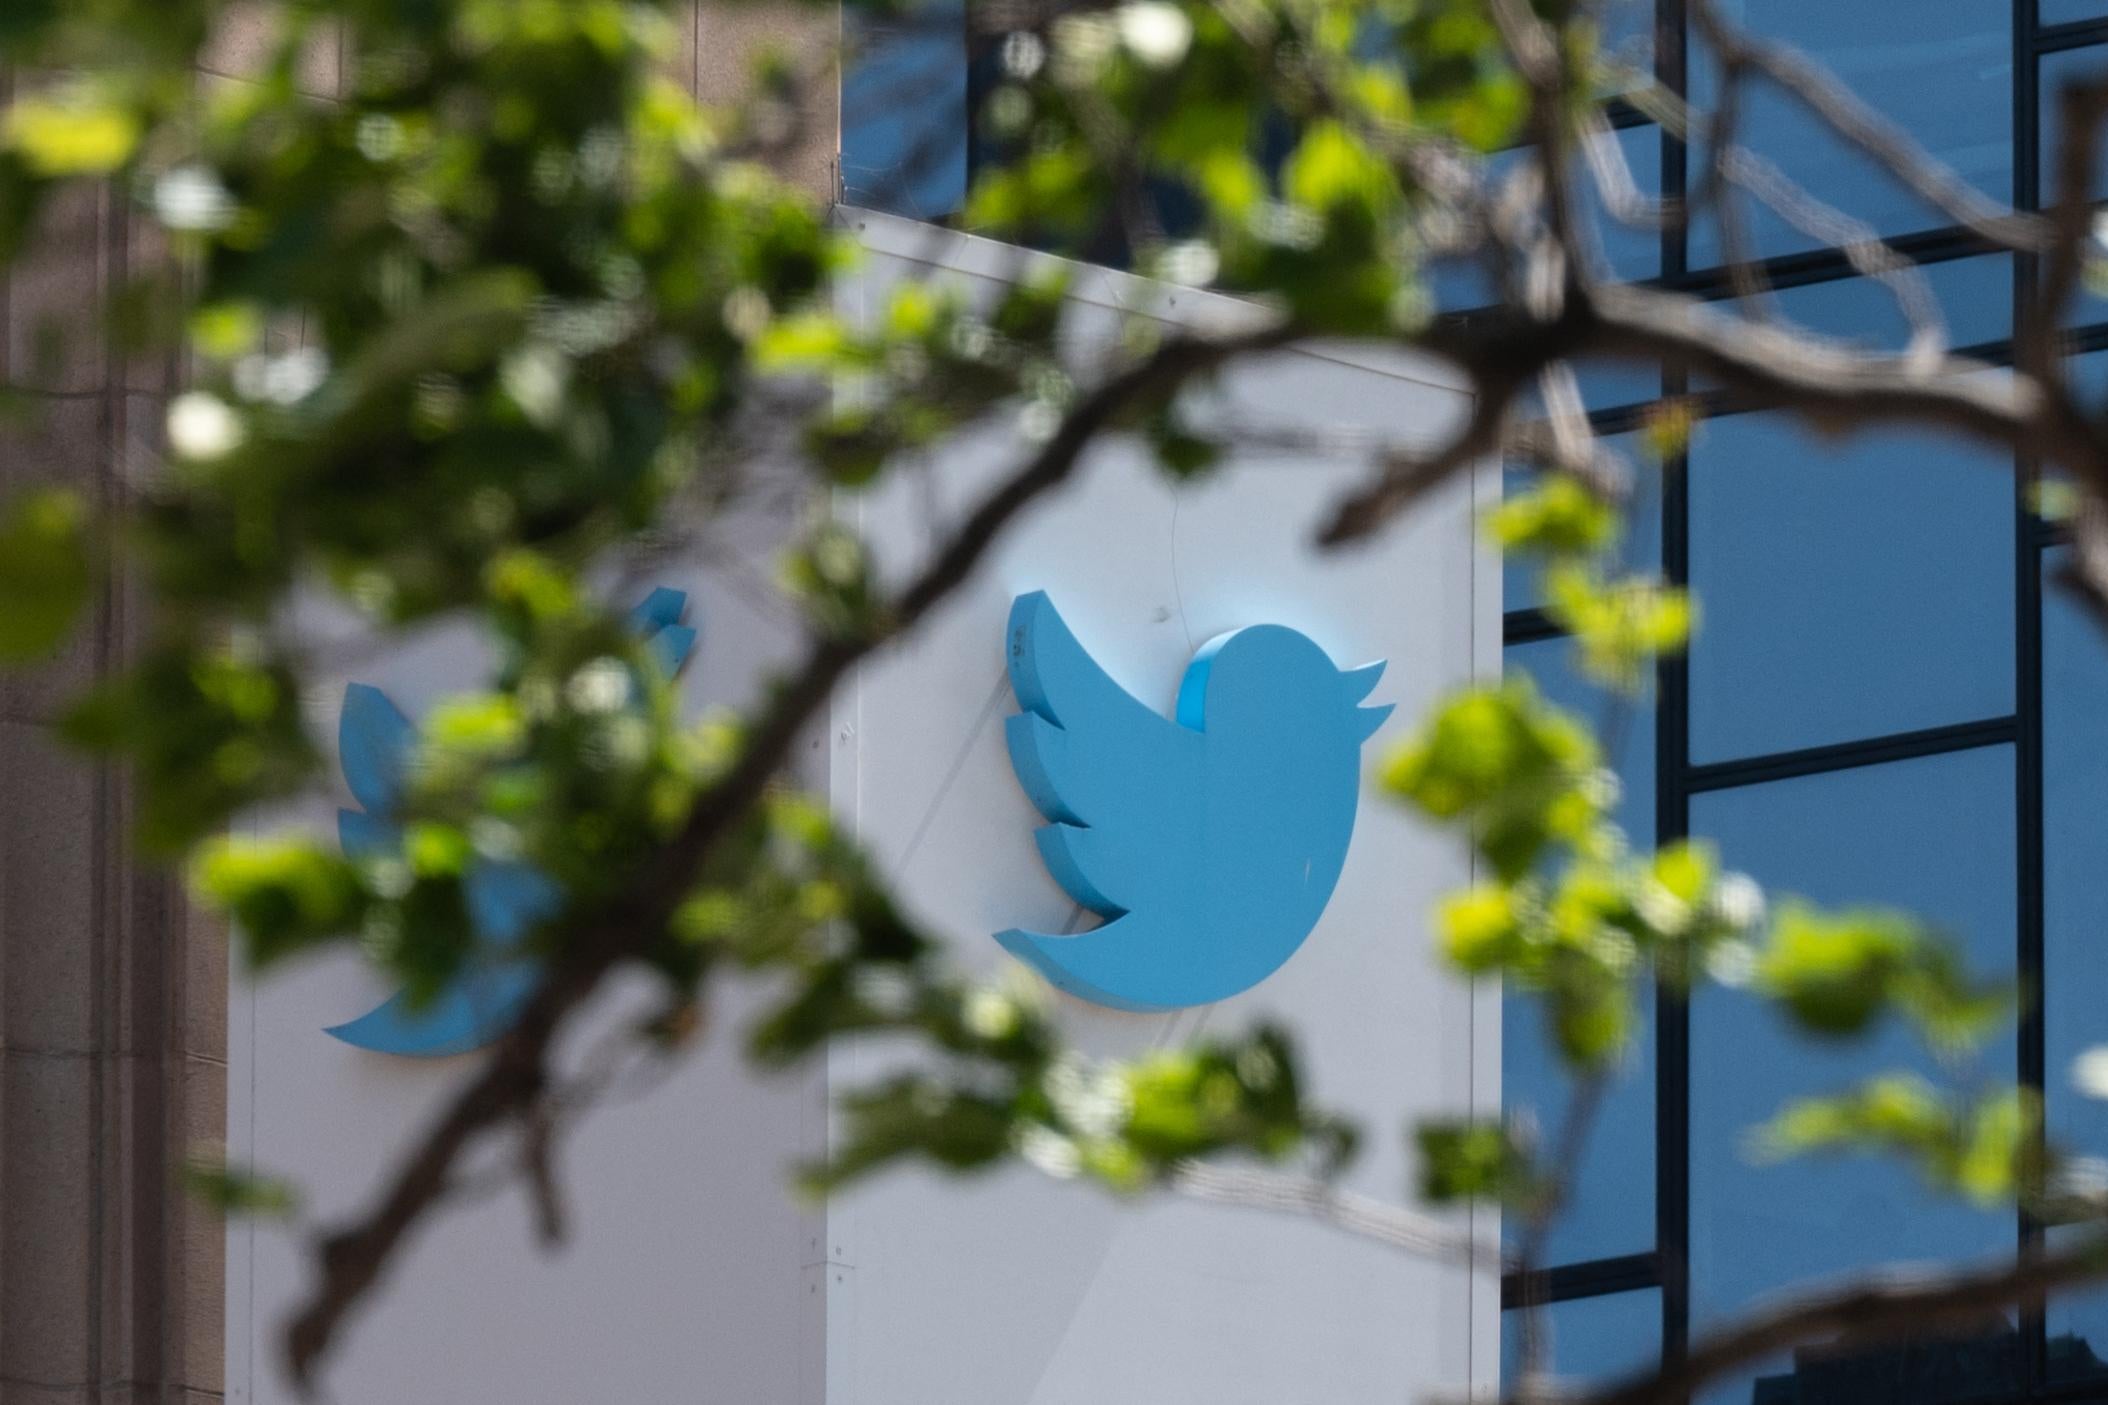 The Twitter bird logo on the side of a building, viewed through tree branches.